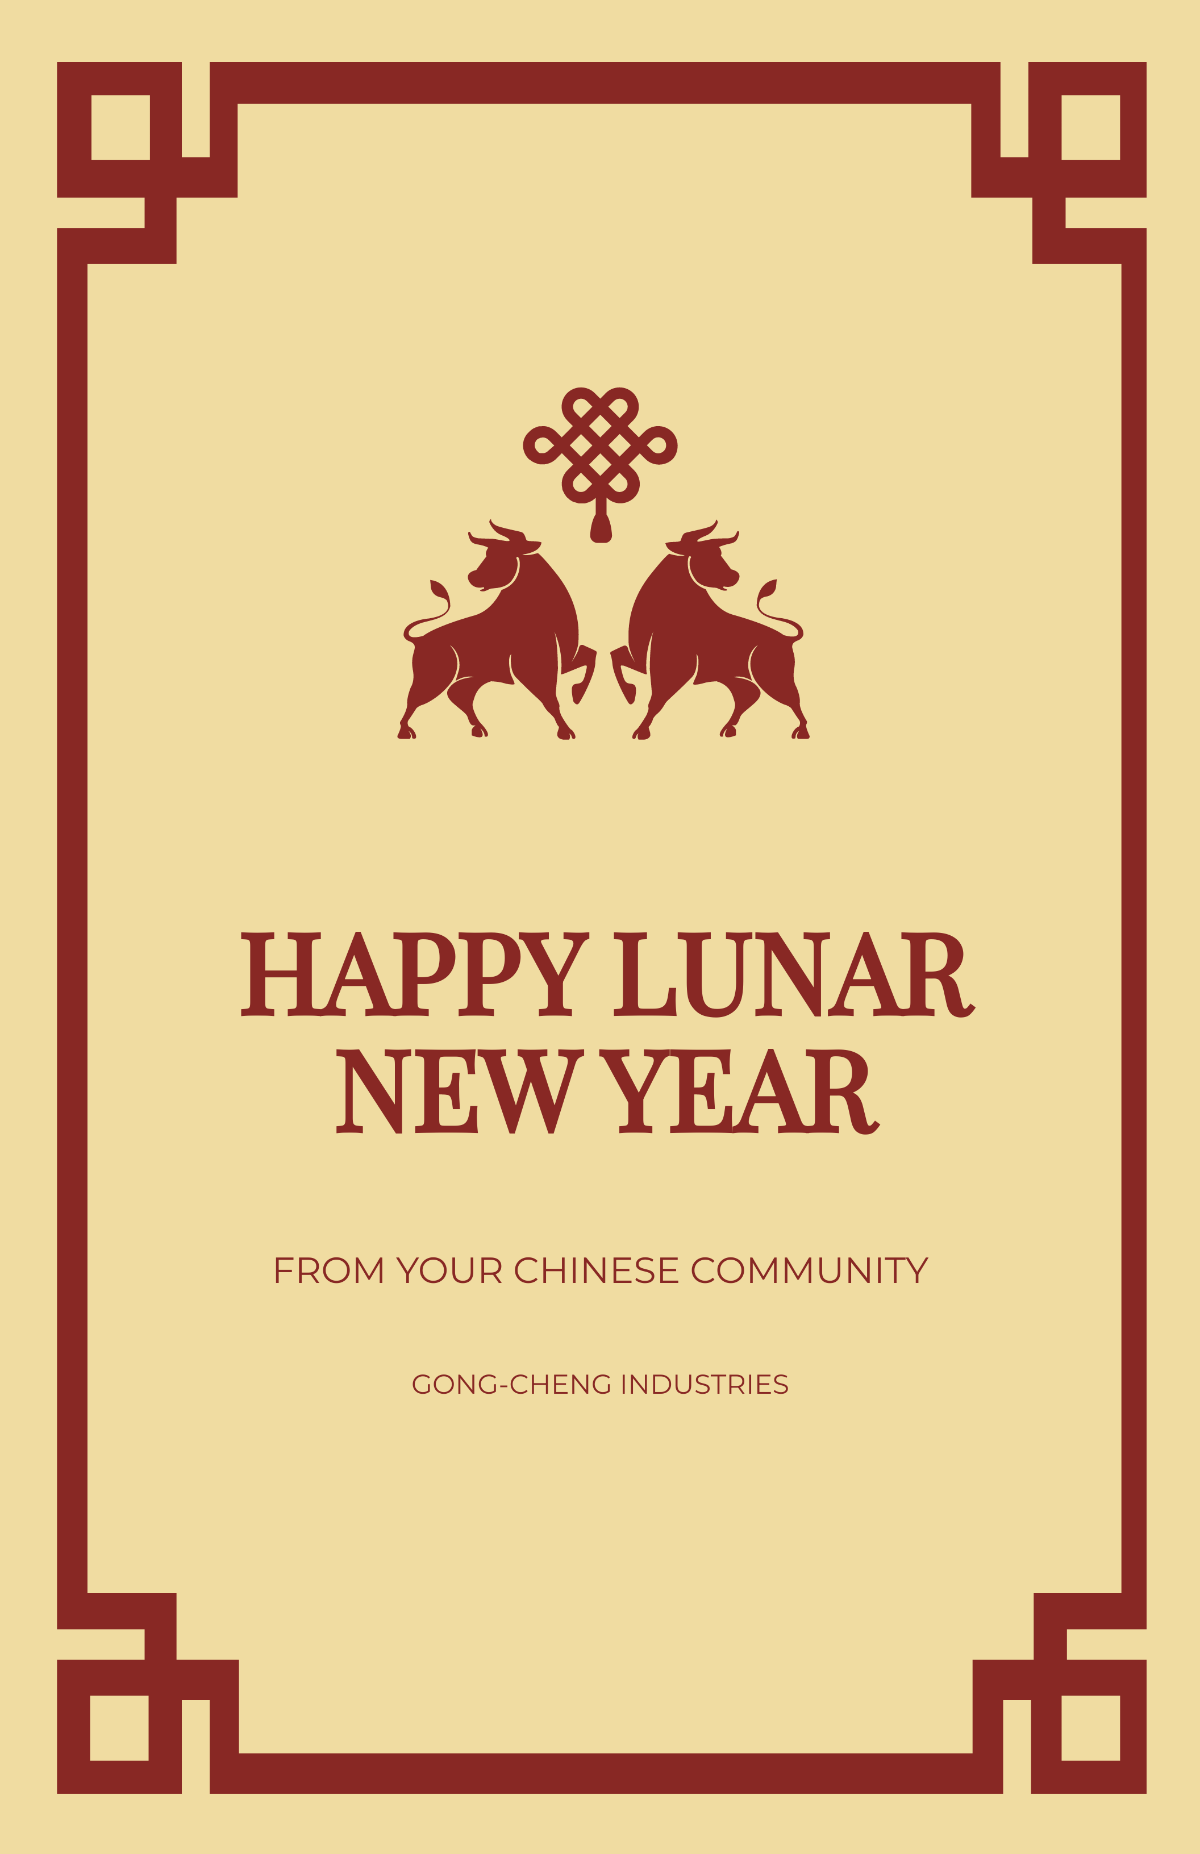 Vintage Chinese New Year Poster Template